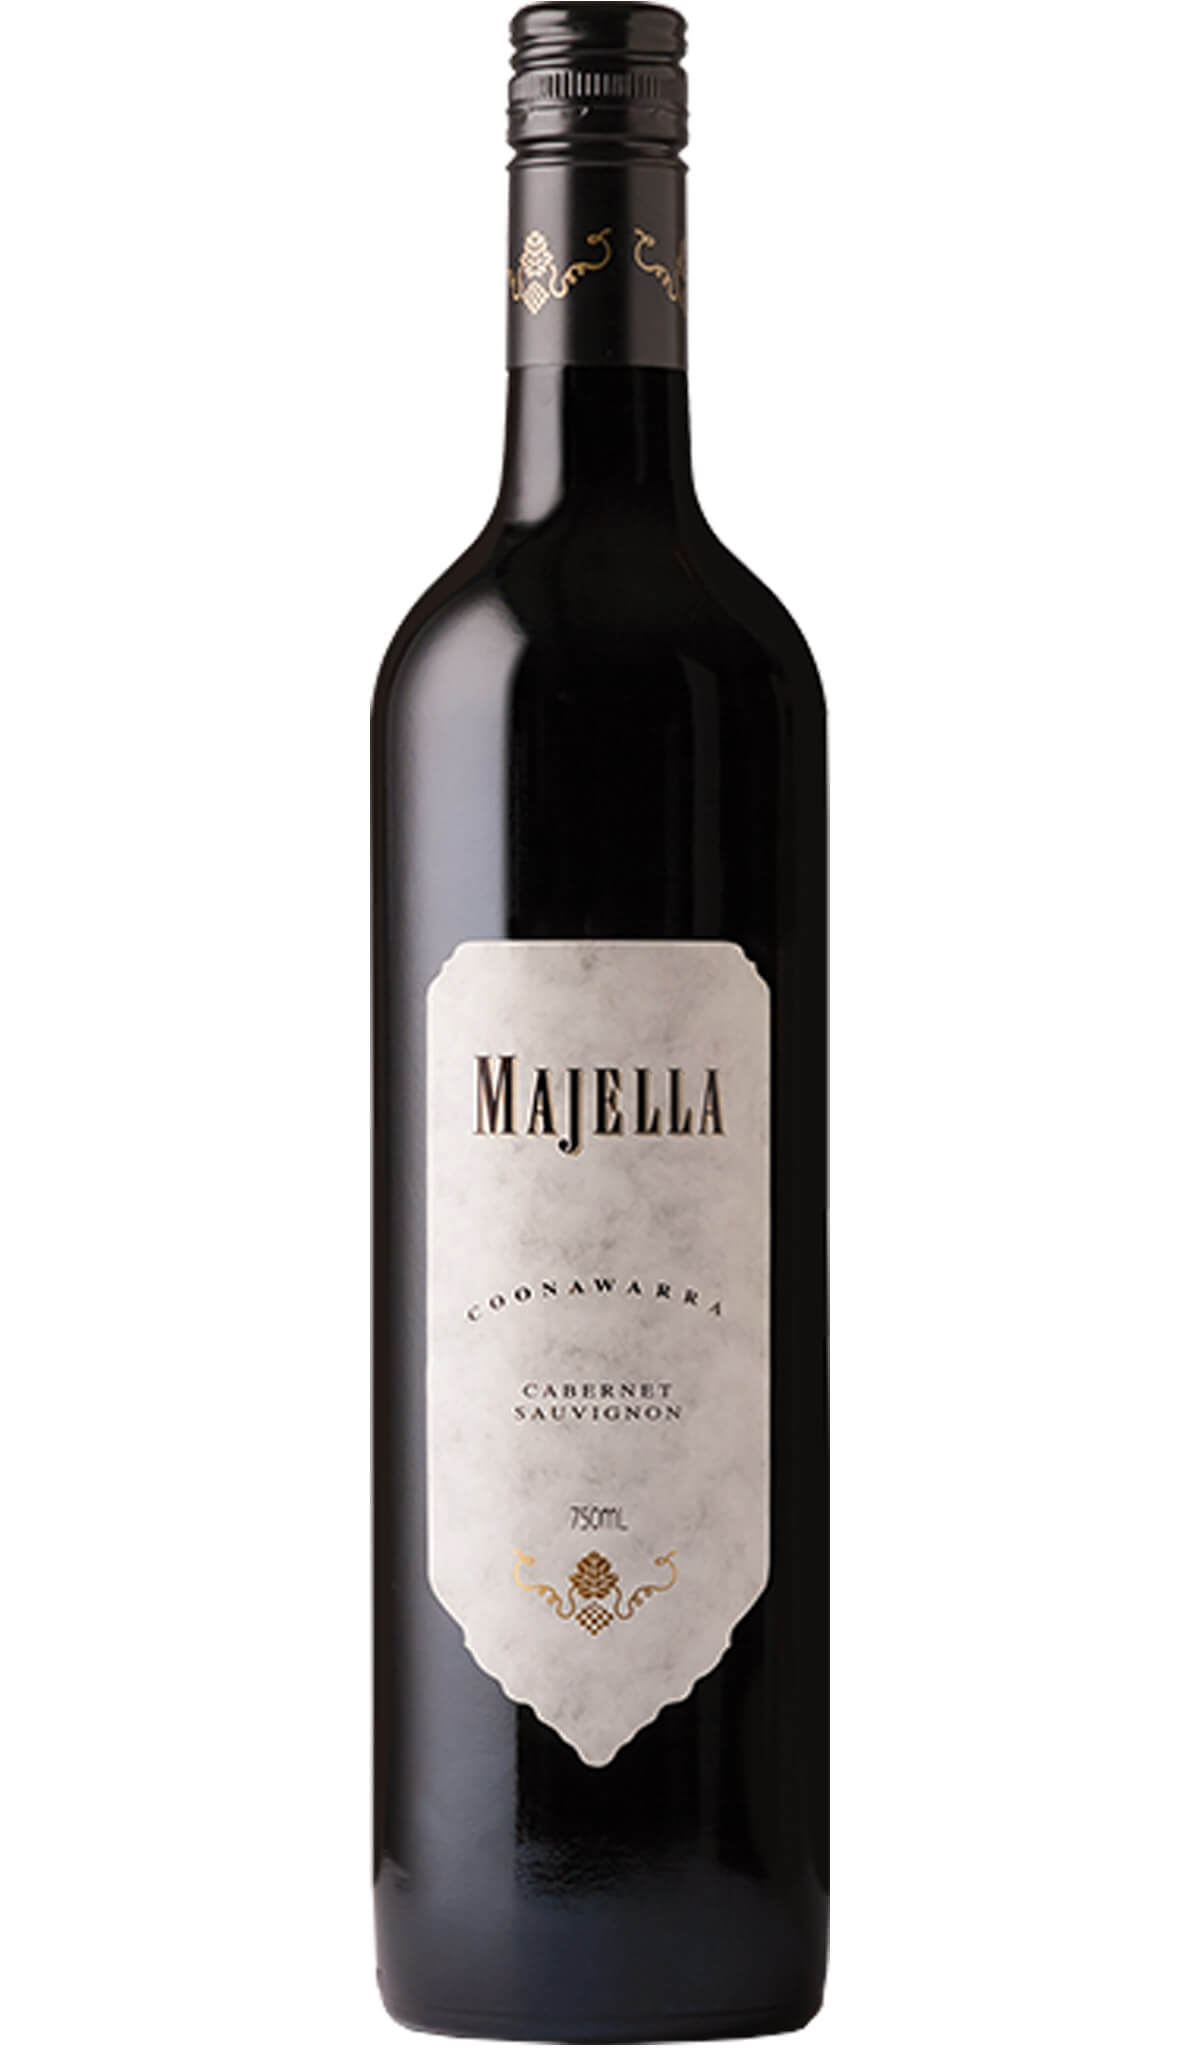 Find out more or buy Majella Coonawarra Cabernet Sauvignon 2020 online at Wine Sellers Direct - Australia’s independent liquor specialists.